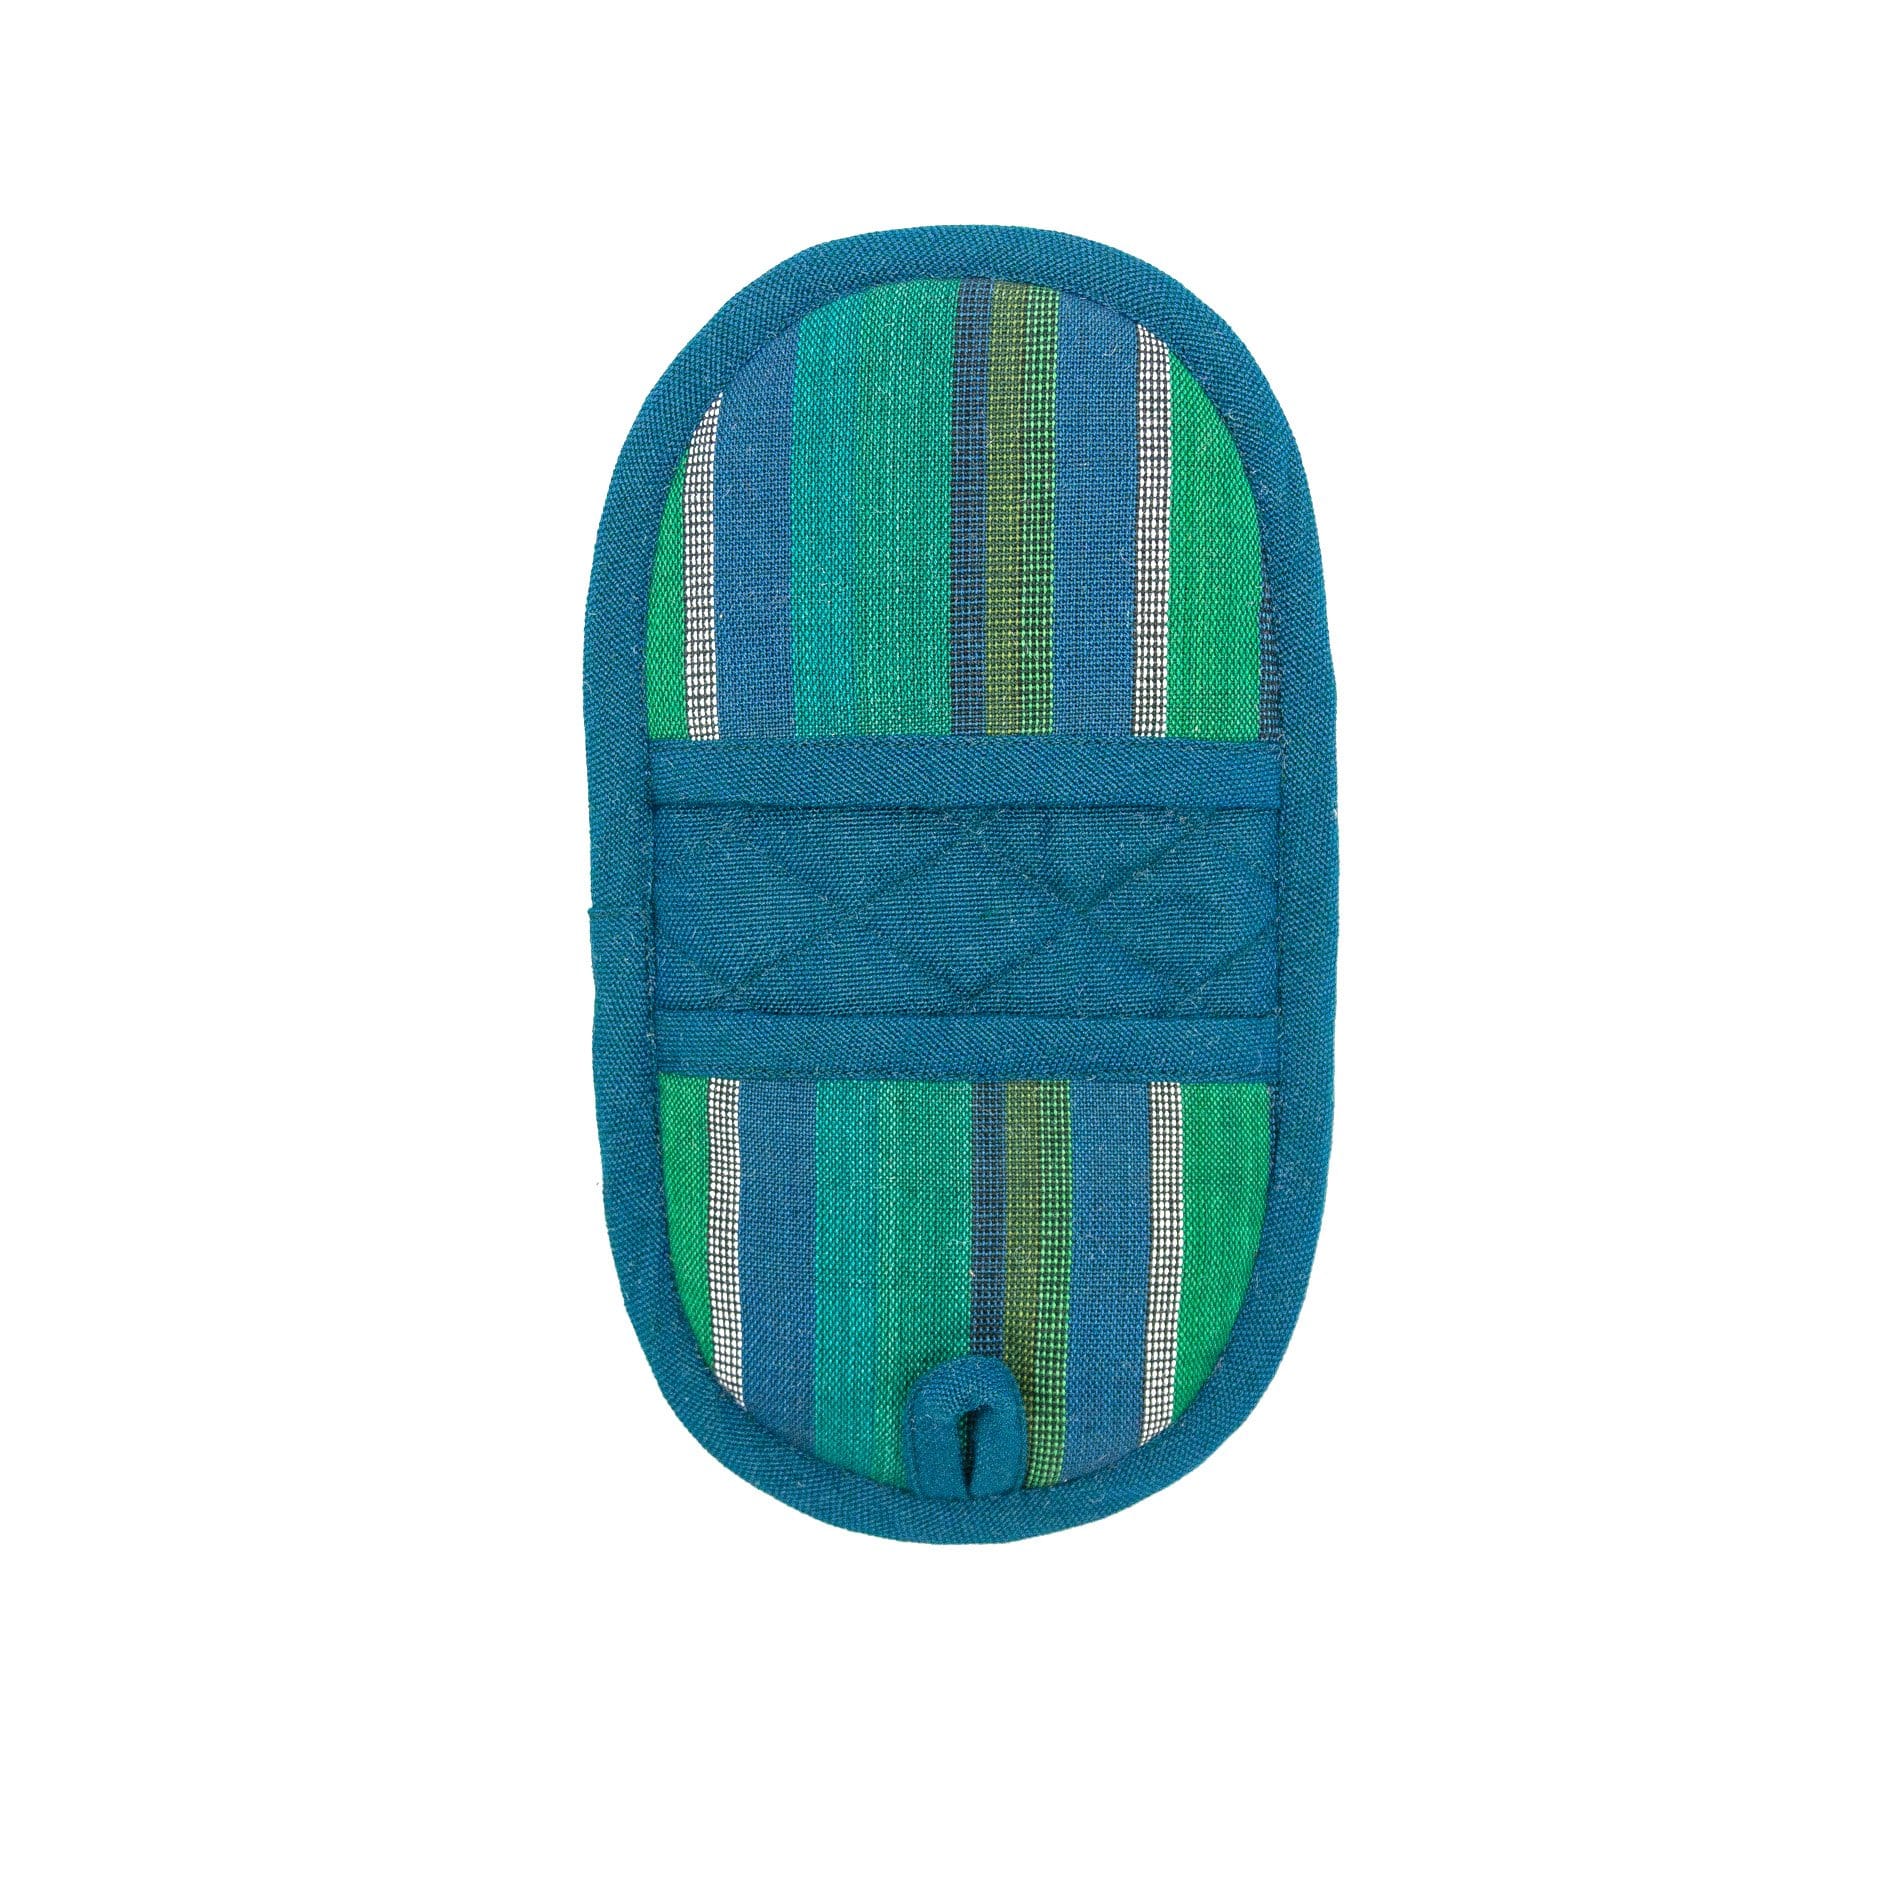 Double-Ended Oval Pot Holder  Guatemalan Fair Trade Kitchen